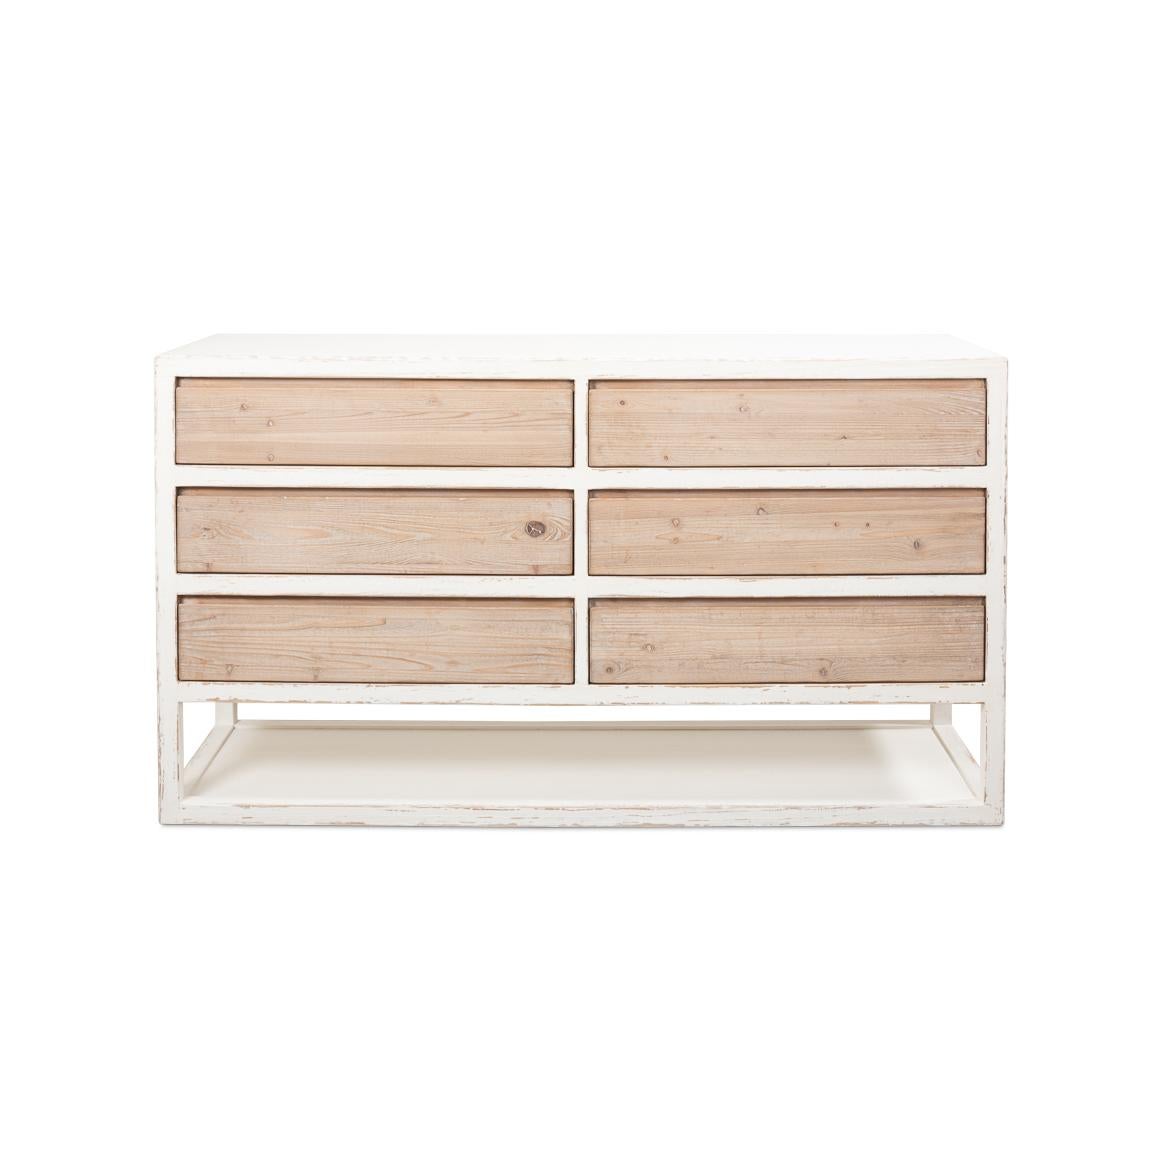 This piece celebrates the simplicity and warmth of rustic design, featuring a white-washed finish that evokes the feel of sun-bleached shores. Crafted with natural reclaimed fir wood drawers, each with its unique grain and character, it offers ample